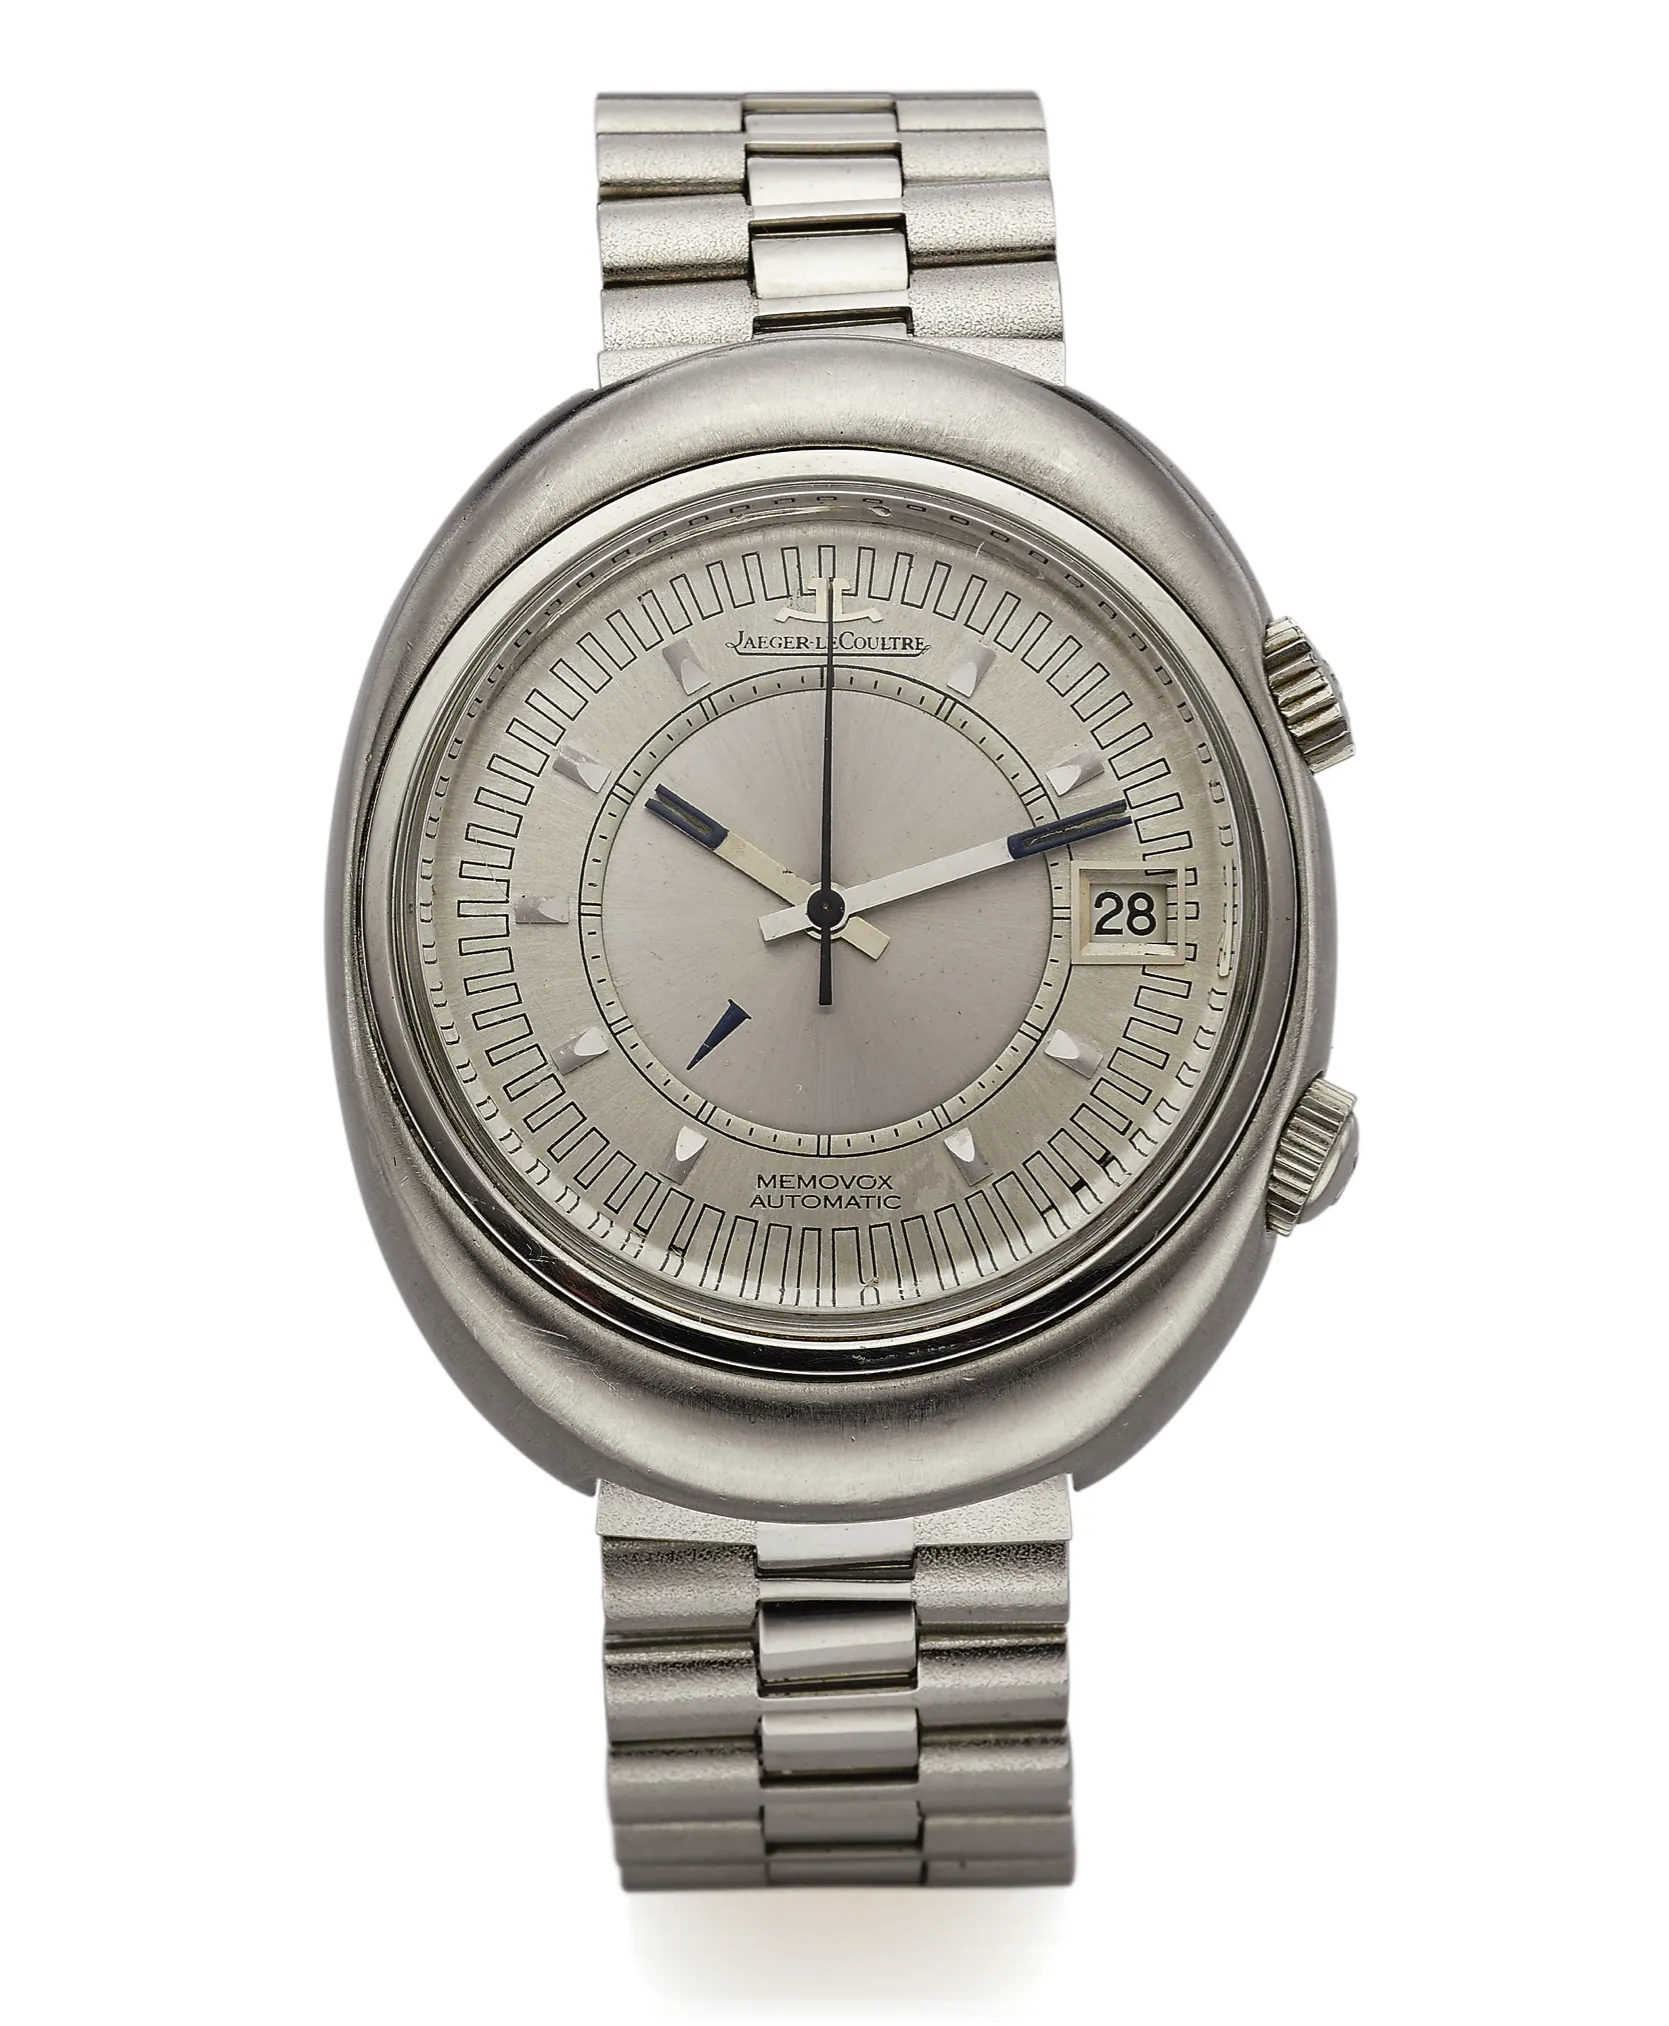 Jaeger-LeCoultre E873 39mm Stainless steel Silver